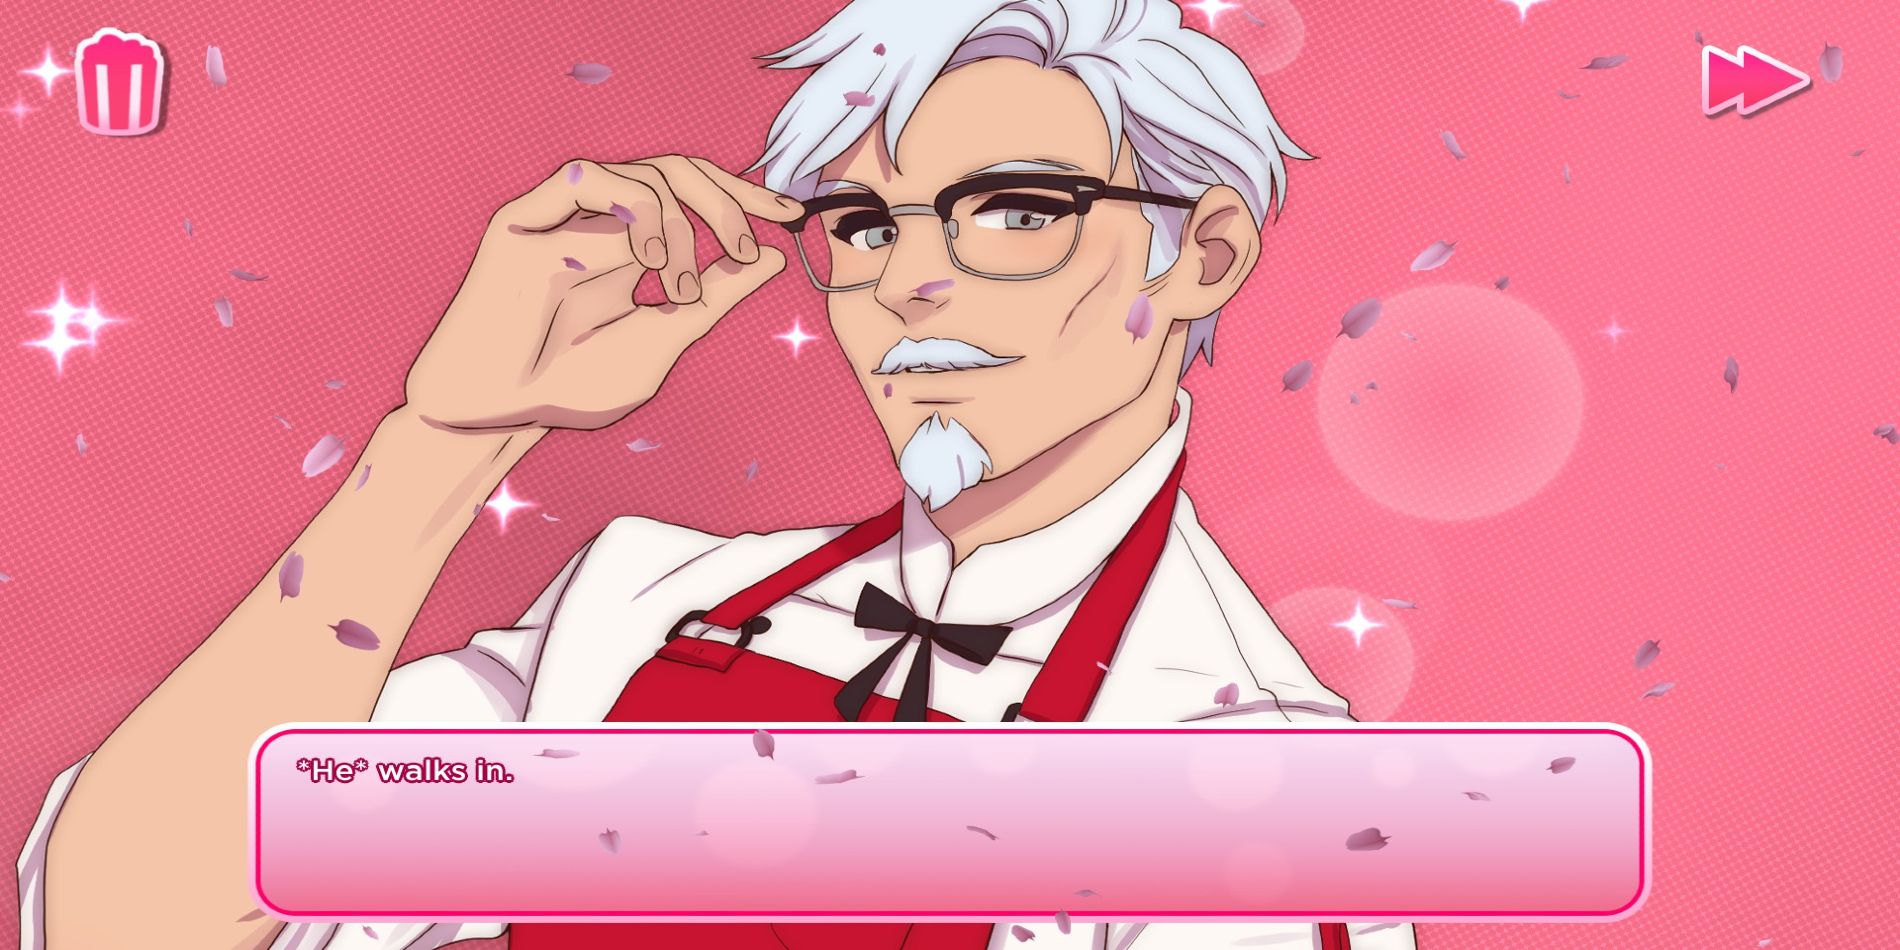 Screenshot from the game I Love You Colonel Sanders! showing the titular character Colonel Sanders.